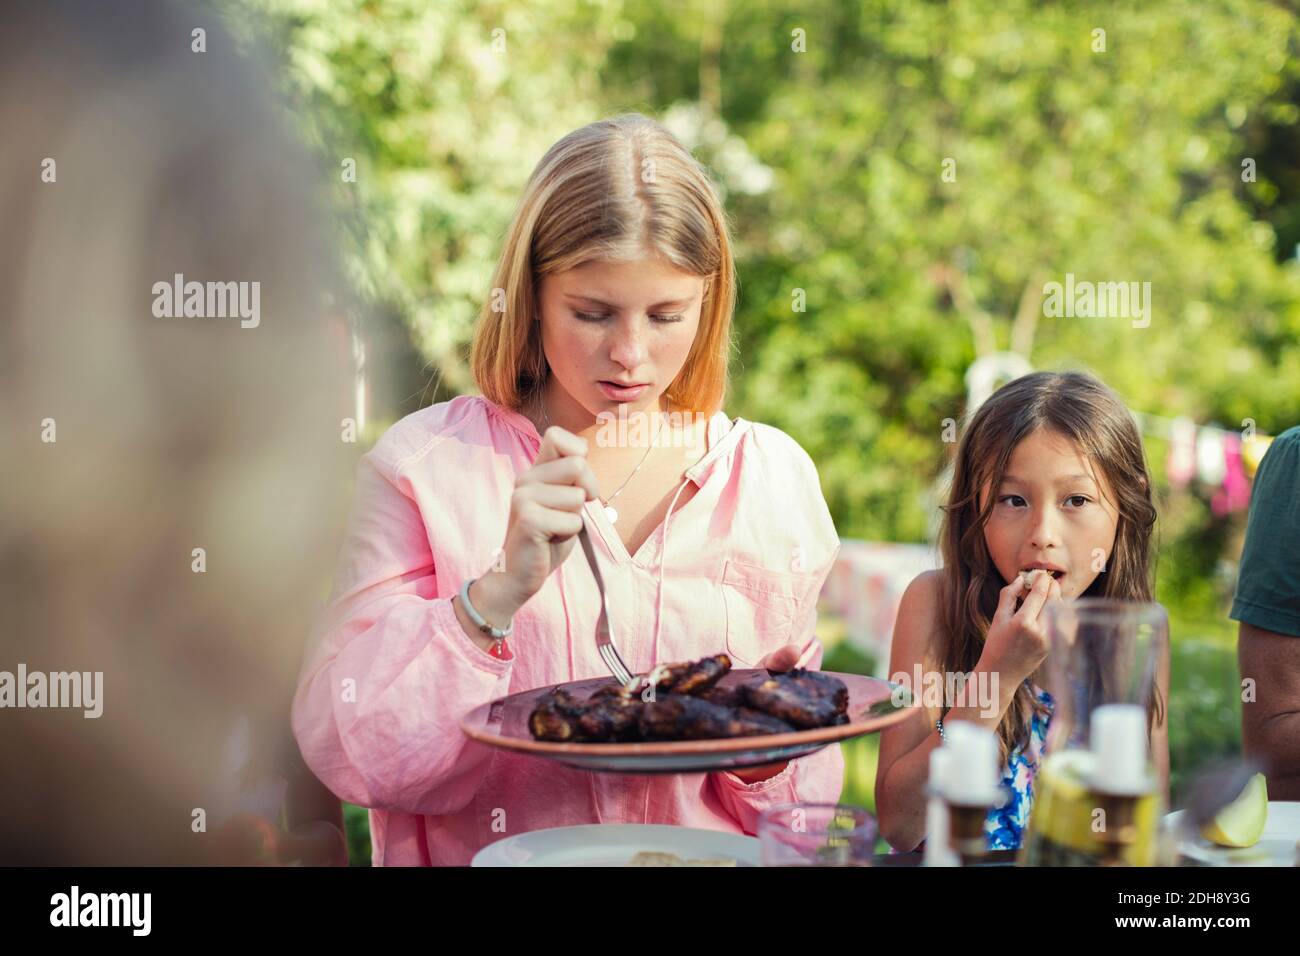 Girls eating lunch in back yard during garden party Stock Photo